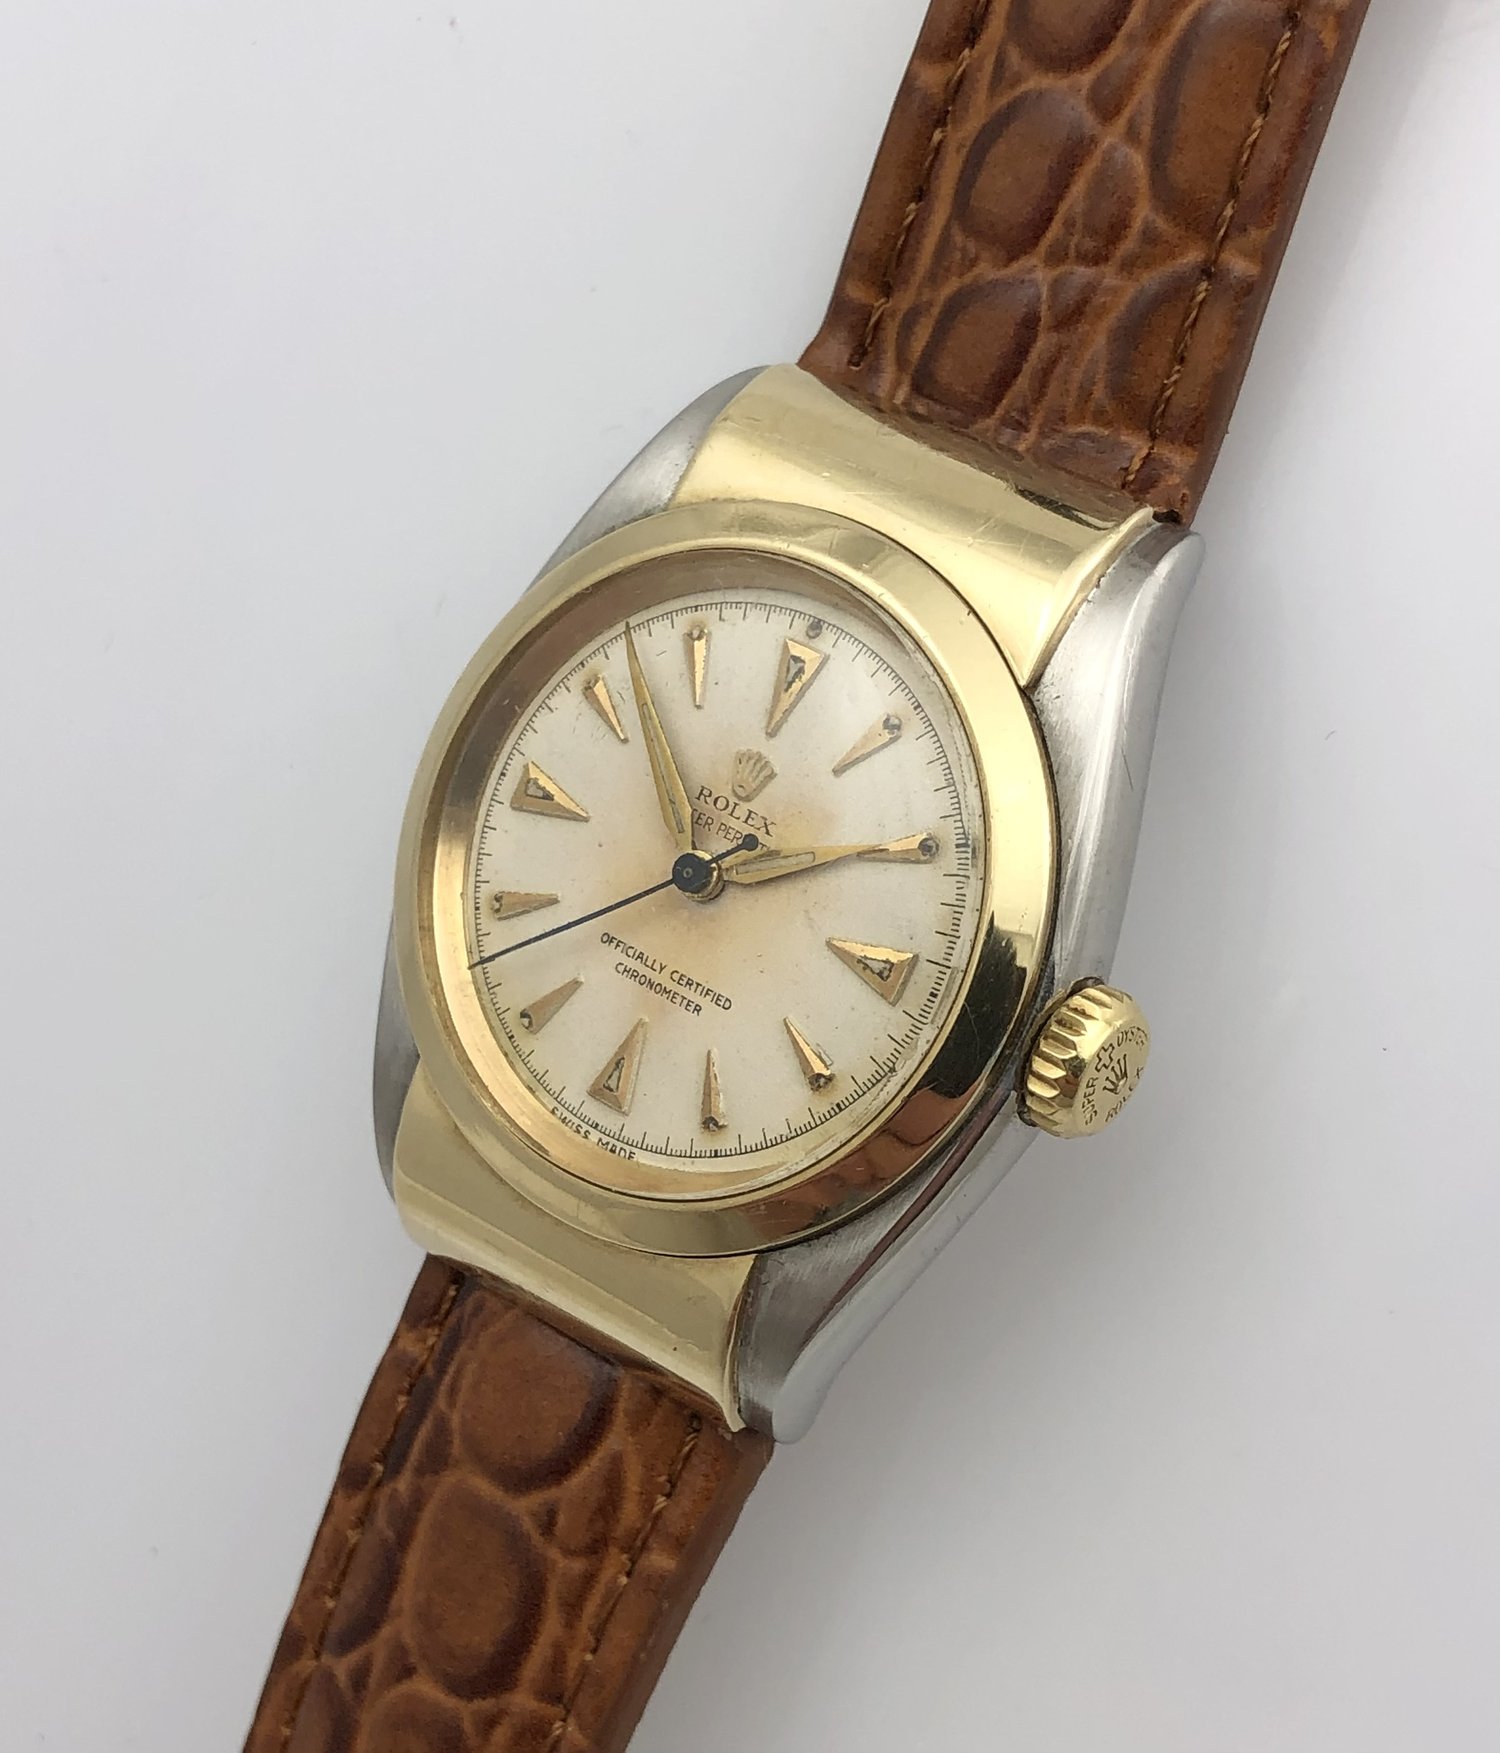 Sold at Auction: A Rolex Vintage Oyster Perpetual Datejust Gold